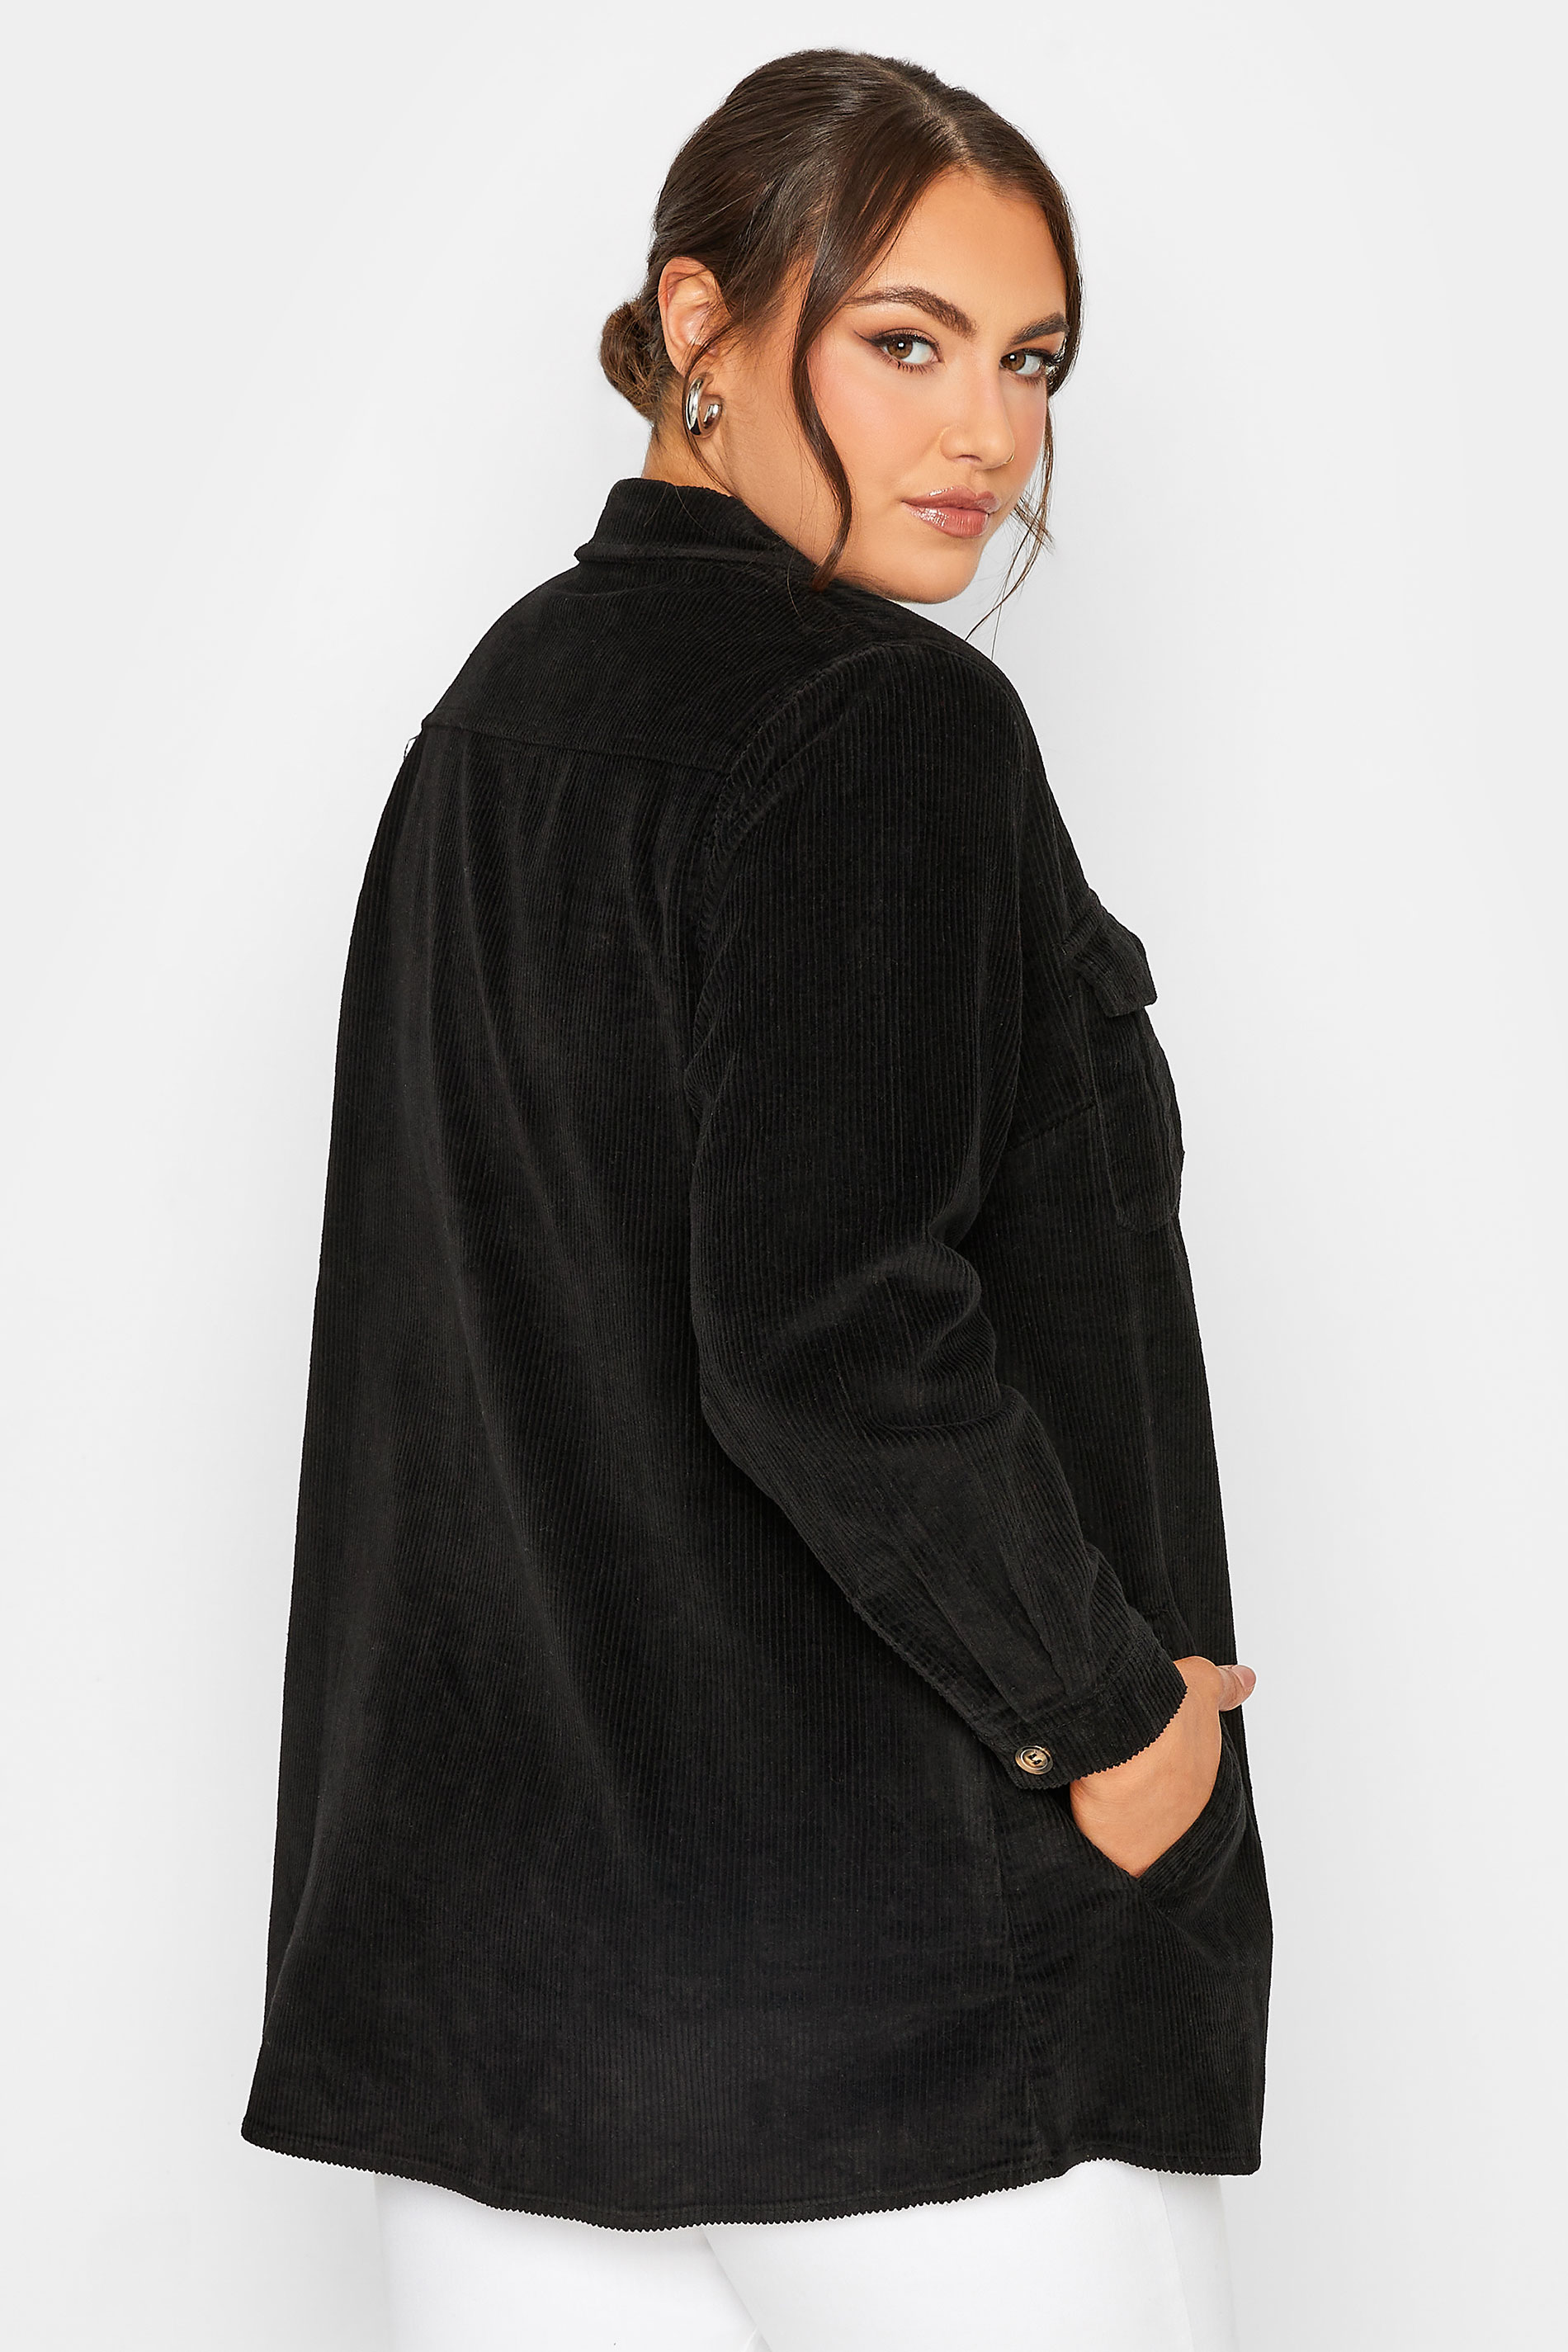 LIMITED COLLECTION Plus Size Womens Black Corduroy Shacket | Yours Clothing 3